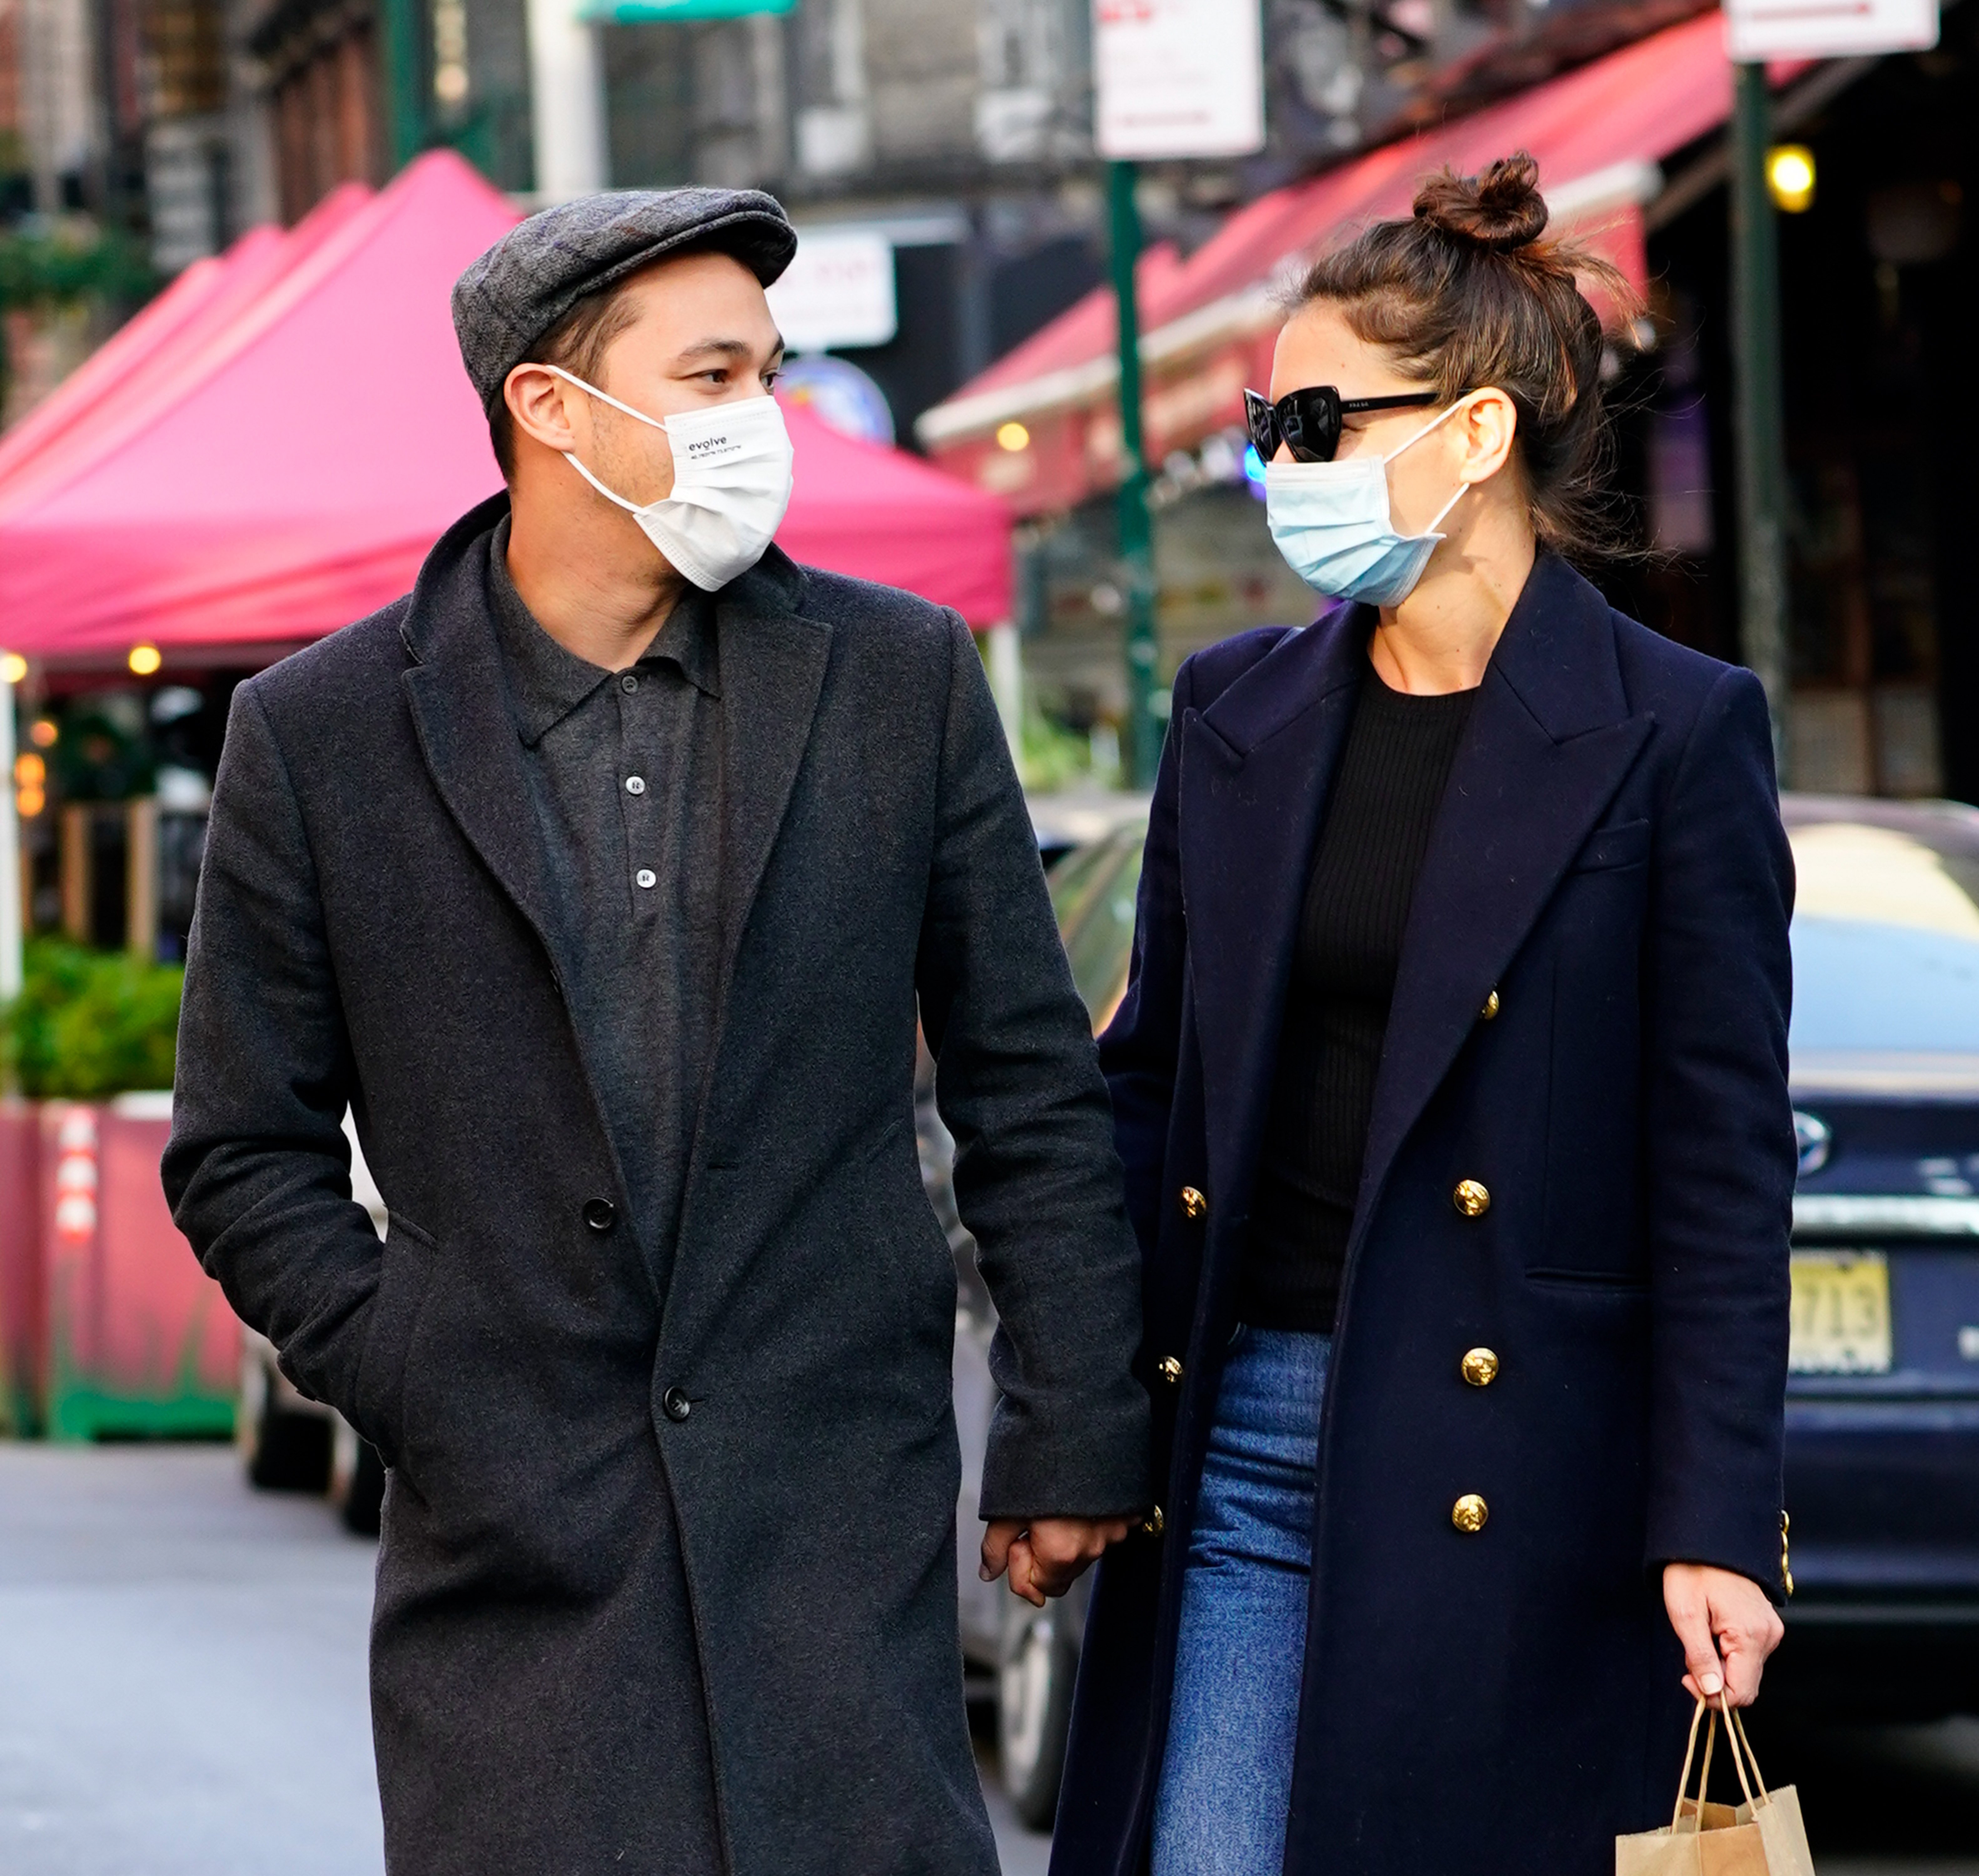 Actress Katie Holmes and Emilio Vitolo Jr. on September 22 2020 in New York City | Source: Getty Images